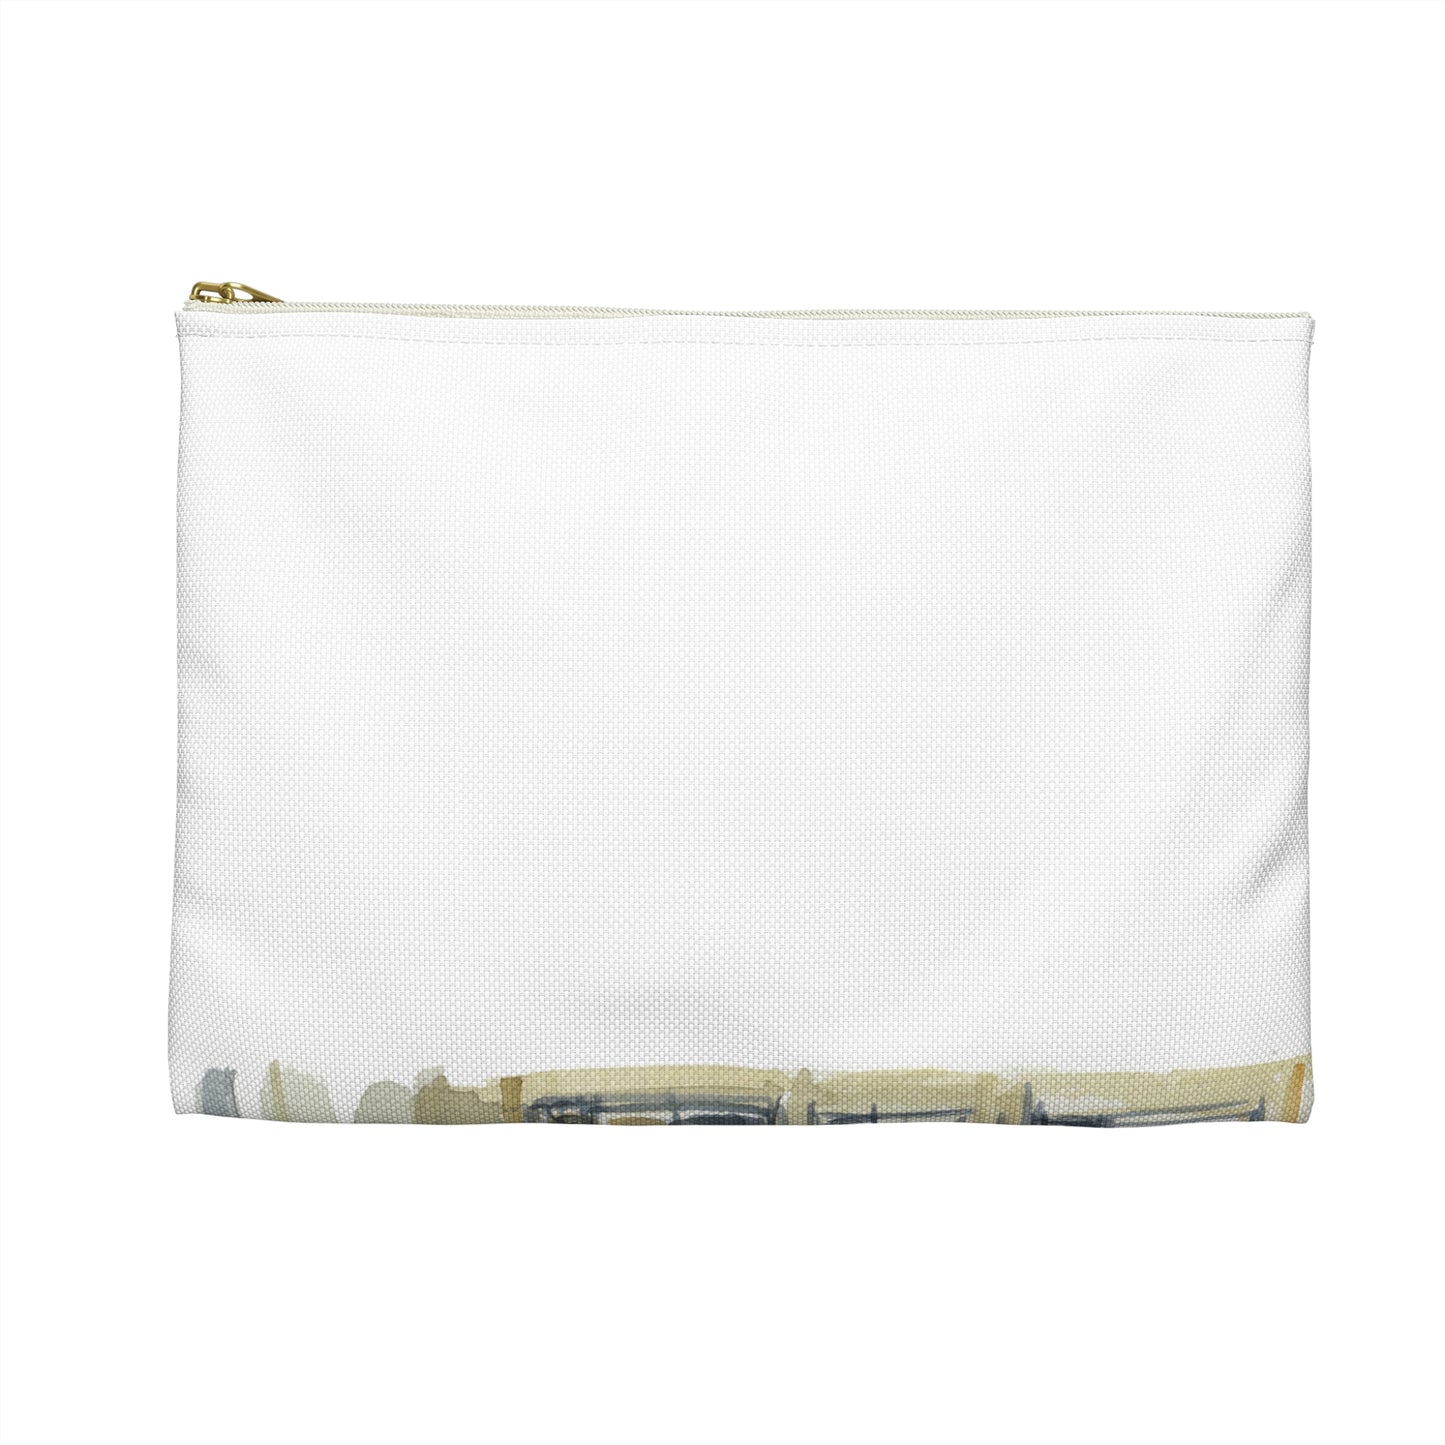 French Doorway Pouch